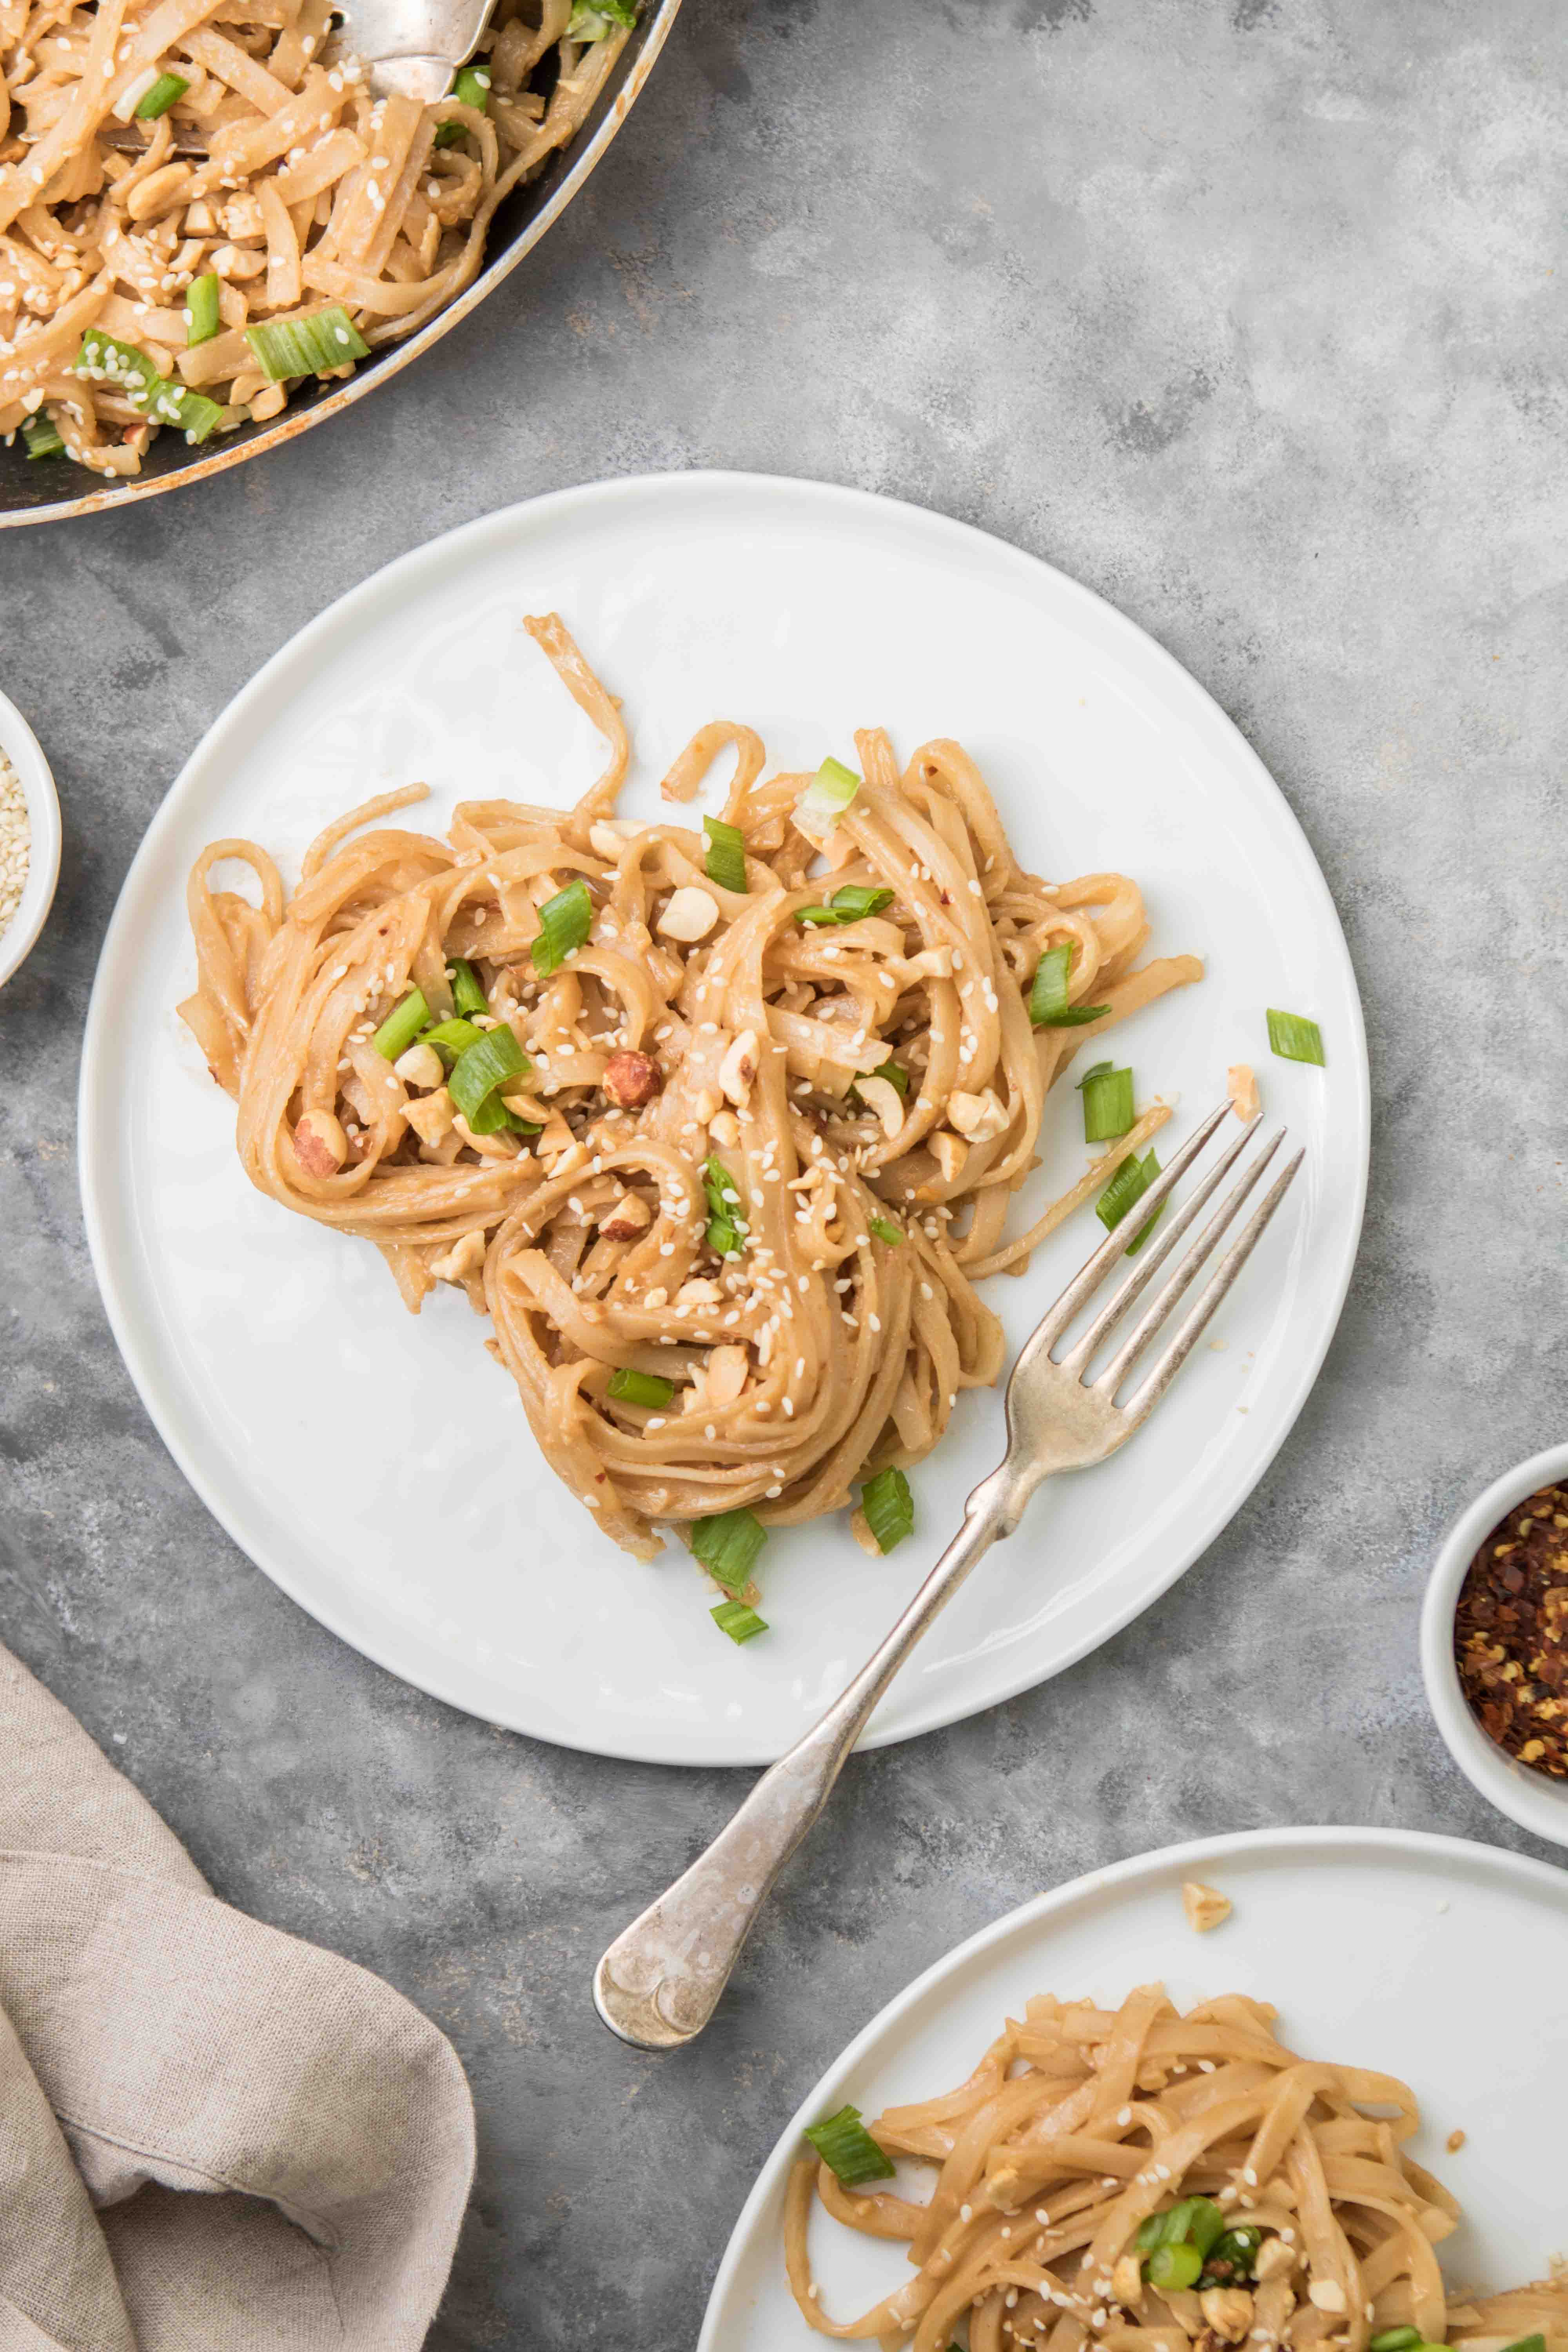 Flatlay photography of peanut butter noodles with a fork on the side